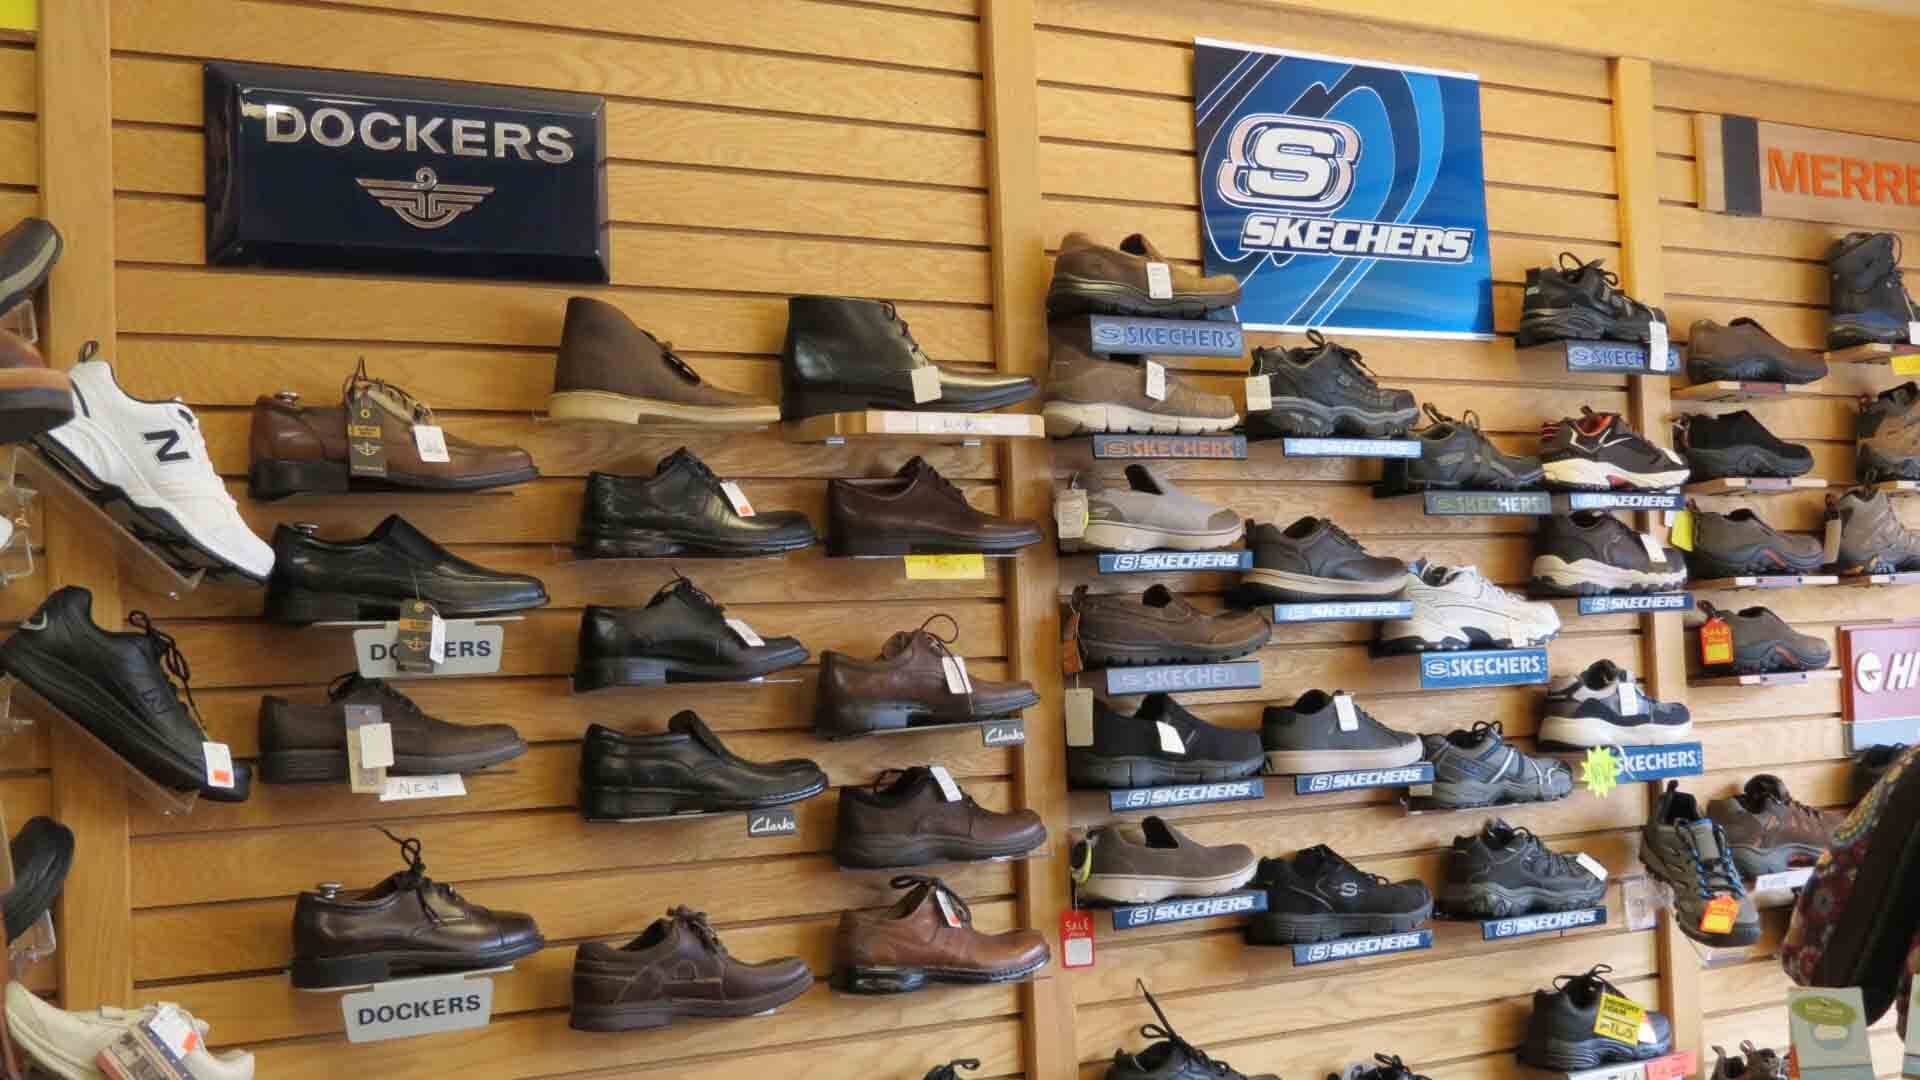 Dockers and Skechers Shoes